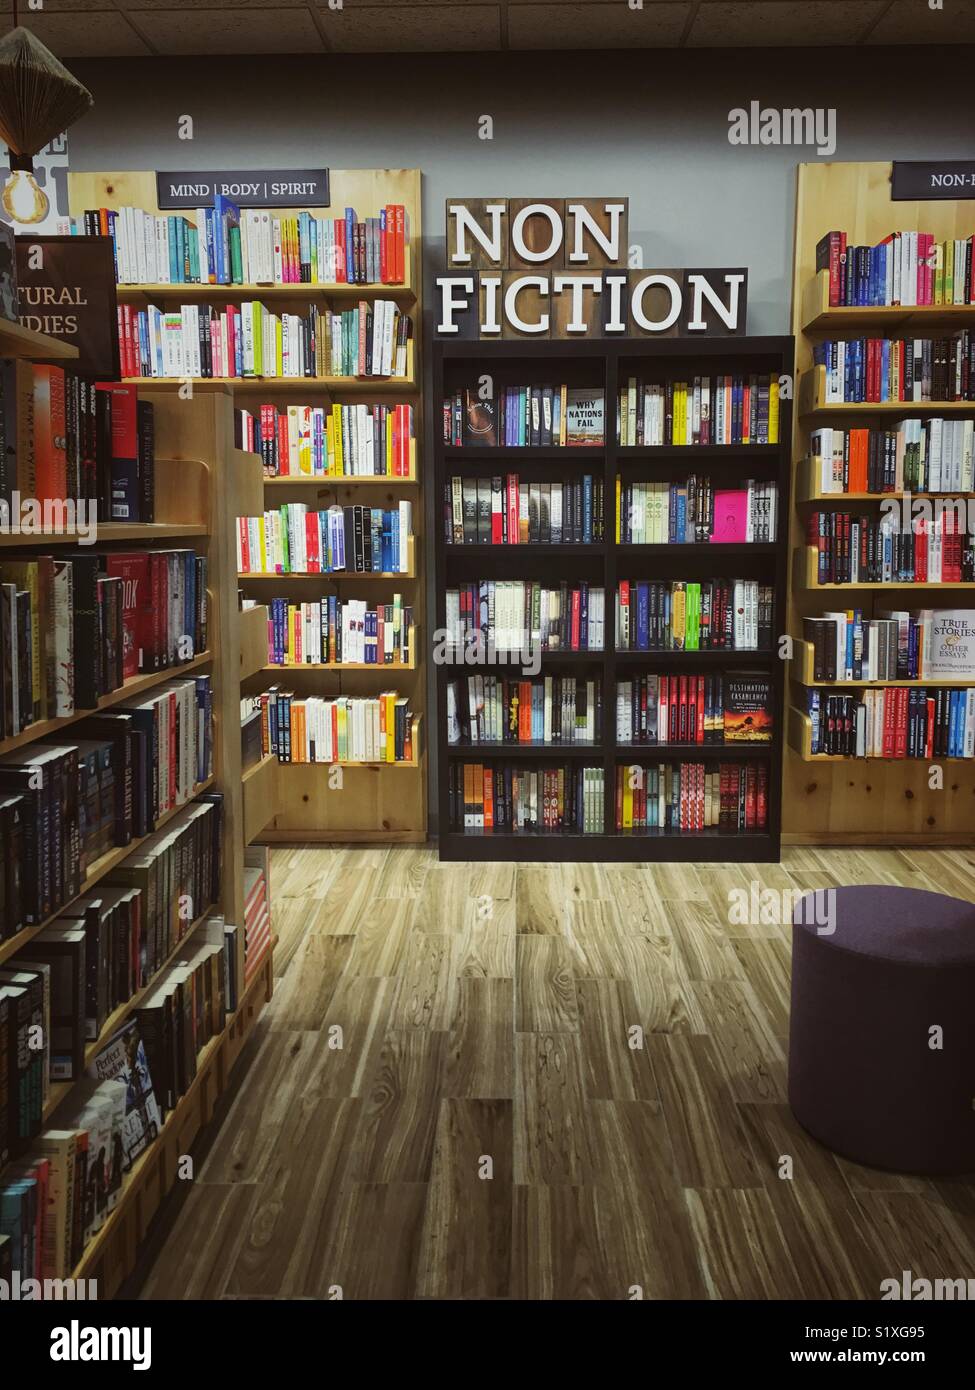 Bookstore with sign Non Fiction above bookcases Stock Photo